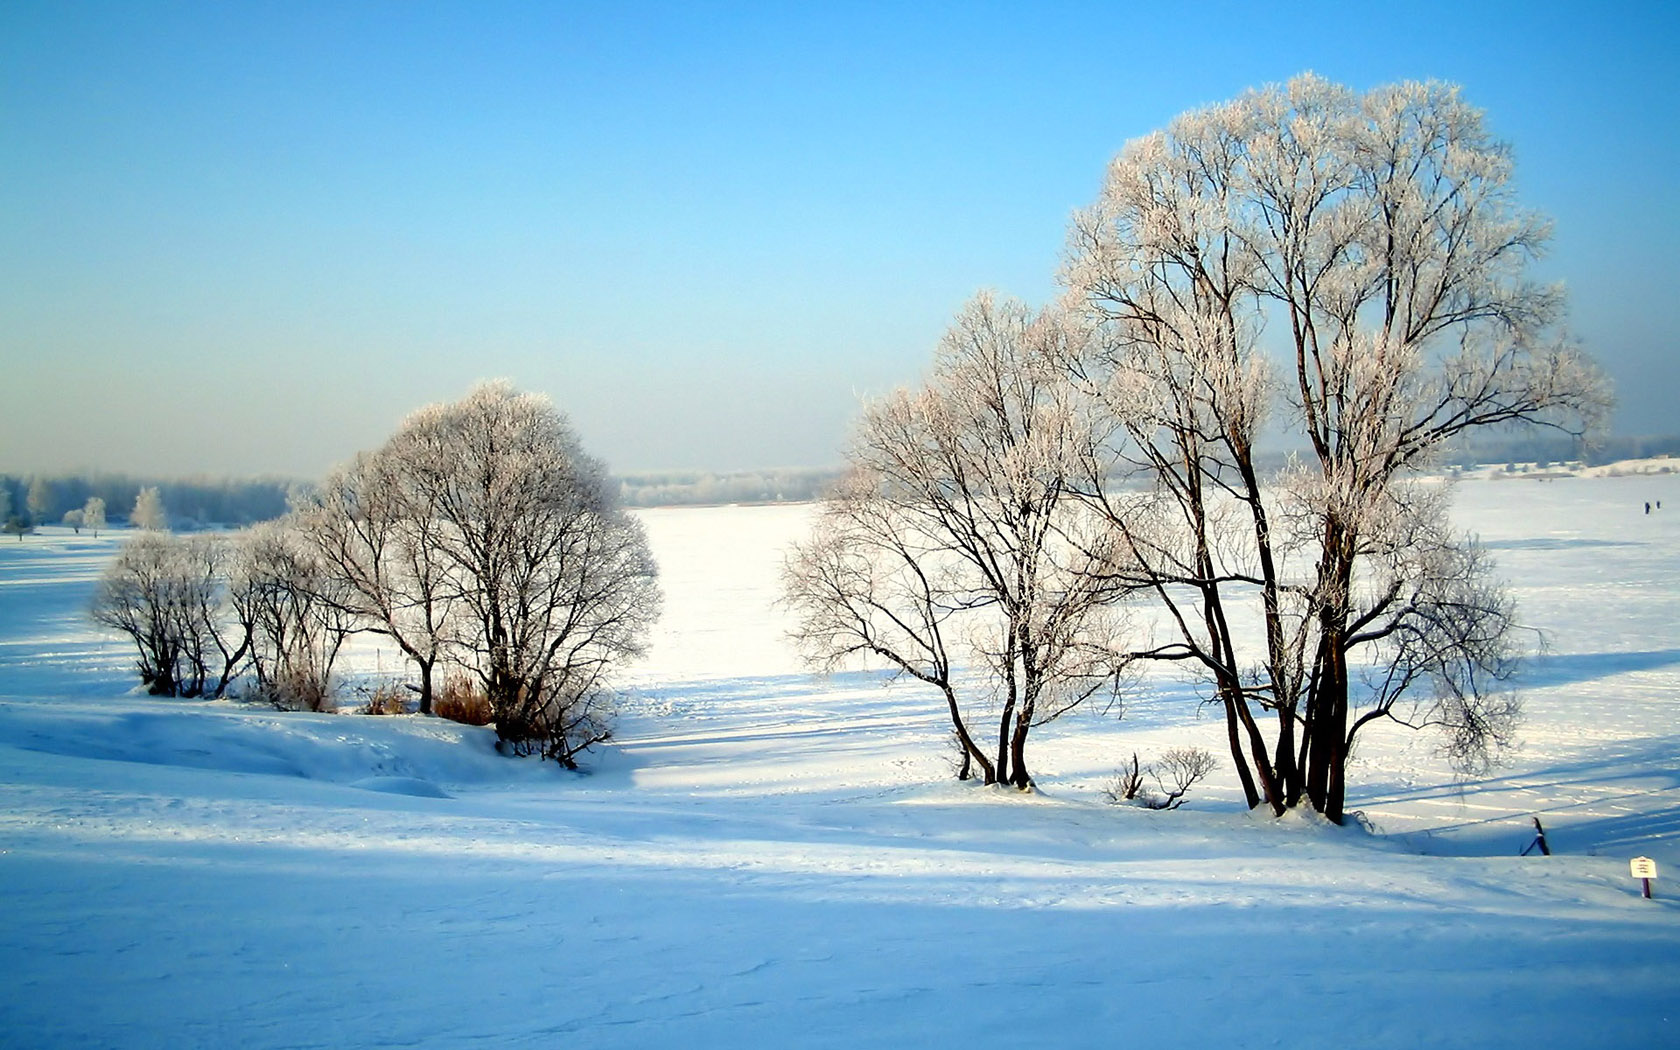 Snow Scenery Wallpapers Group (82+)